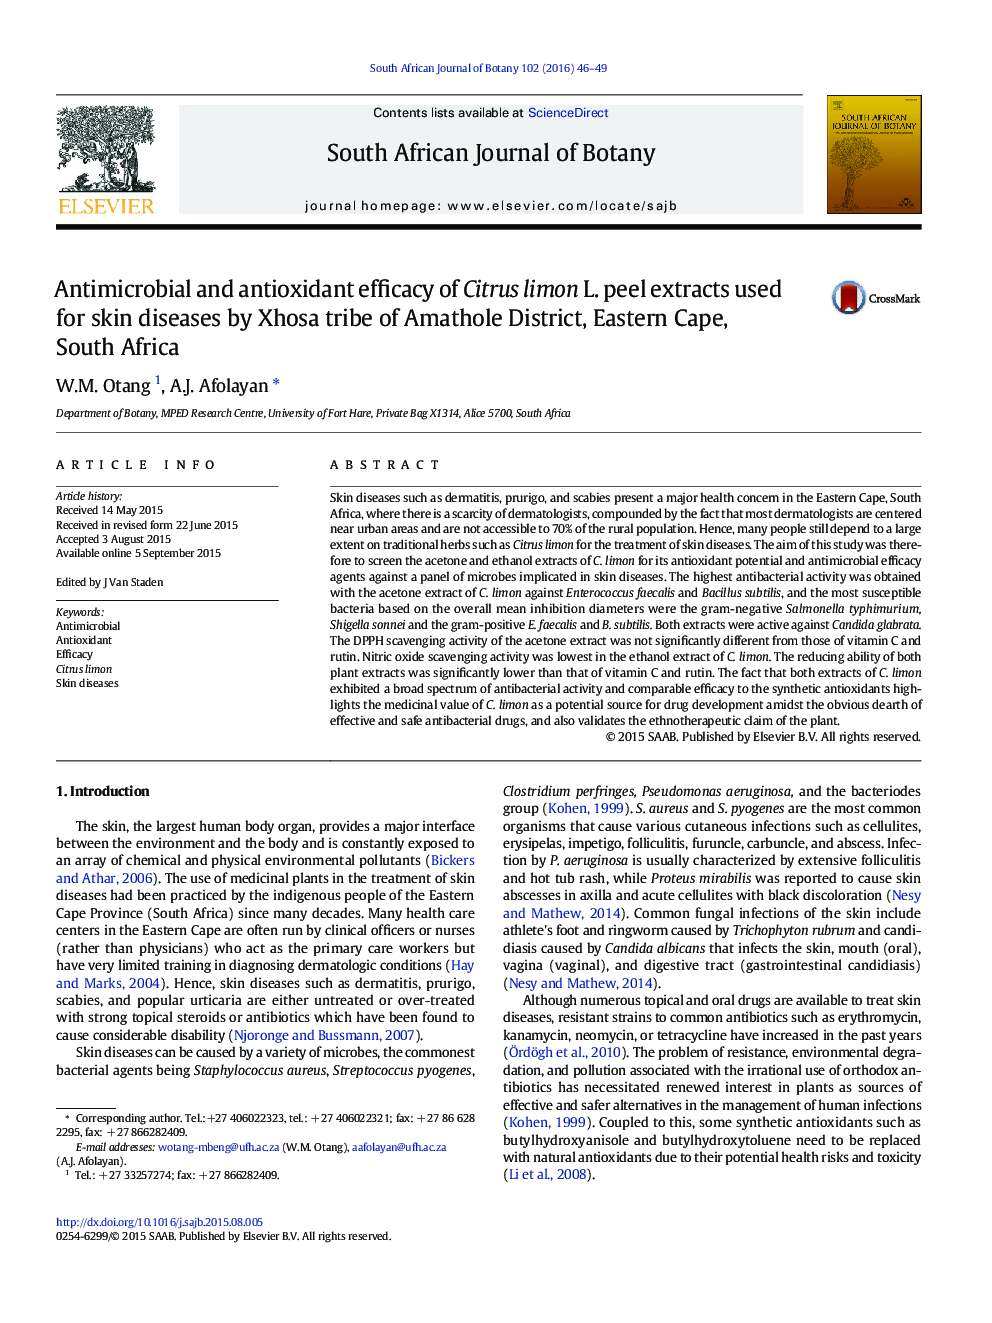 Antimicrobial and antioxidant efficacy of Citrus limon L. peel extracts used for skin diseases by Xhosa tribe of Amathole District, Eastern Cape, South Africa